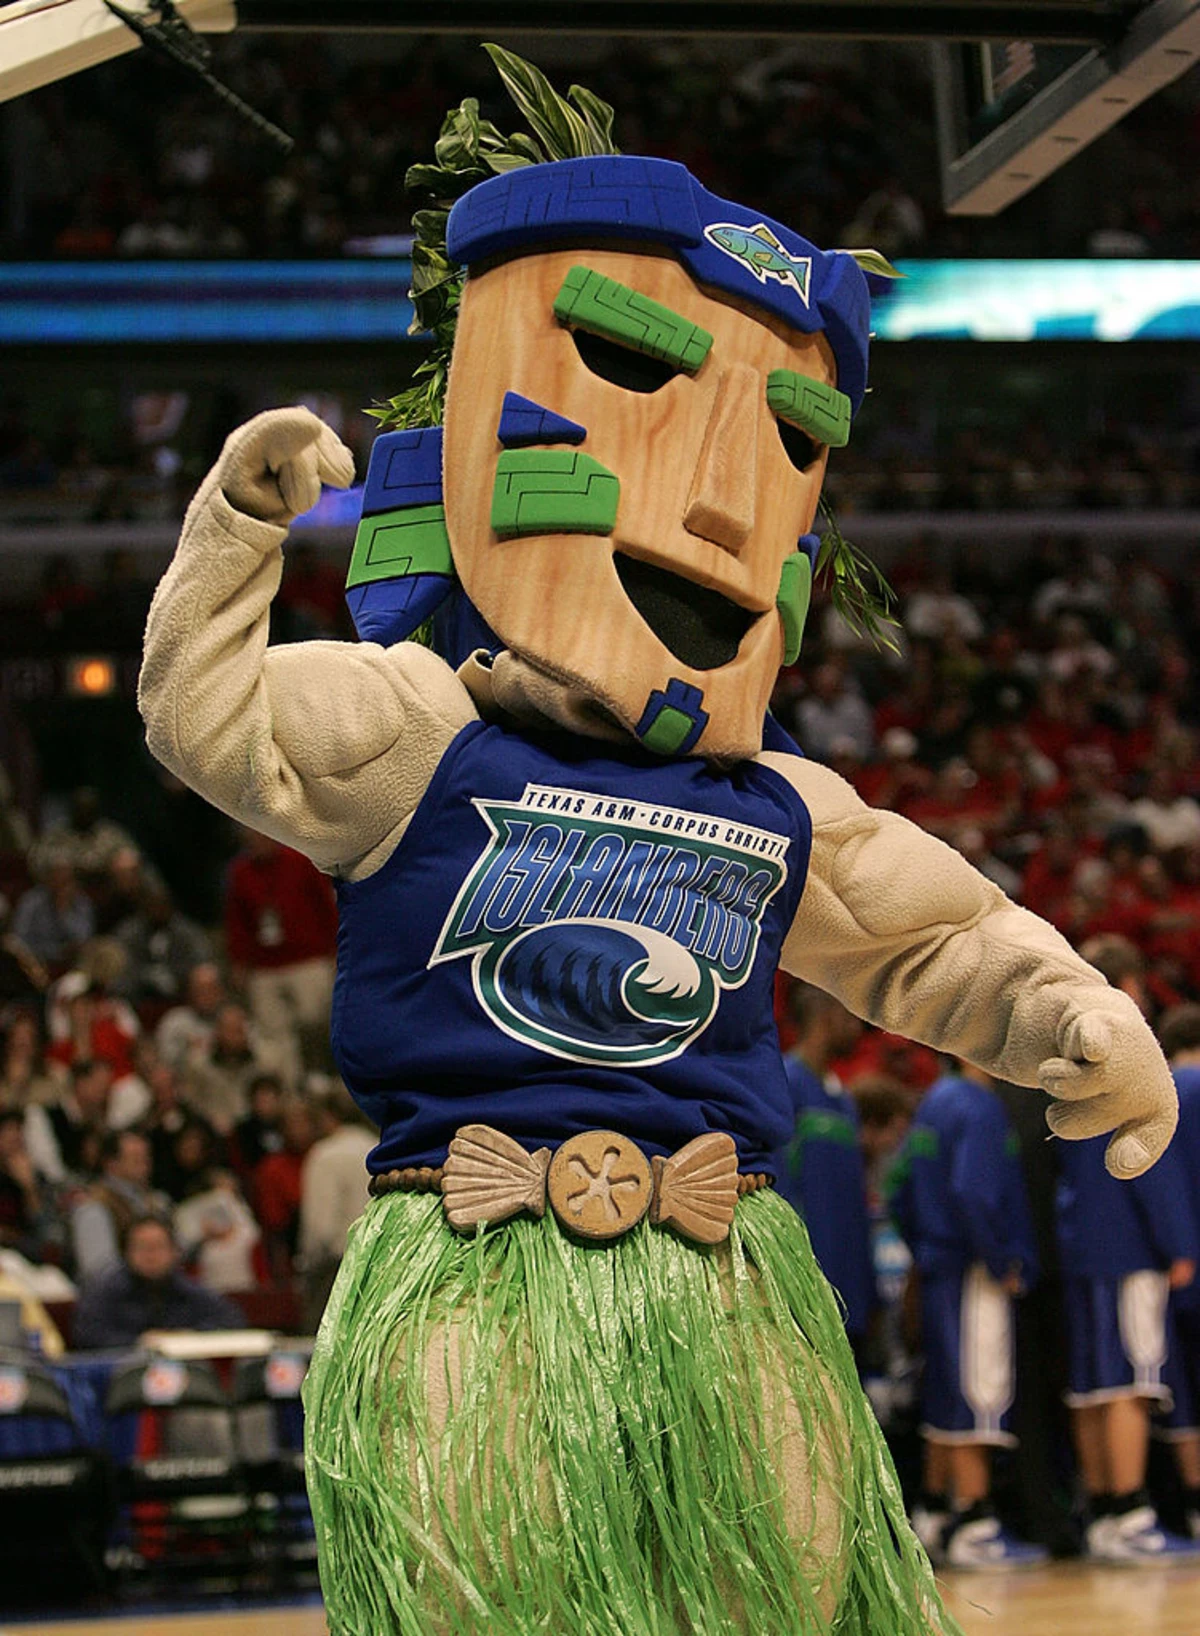 Minnesota Sports Mascots Are Trash (Except One) - Racket